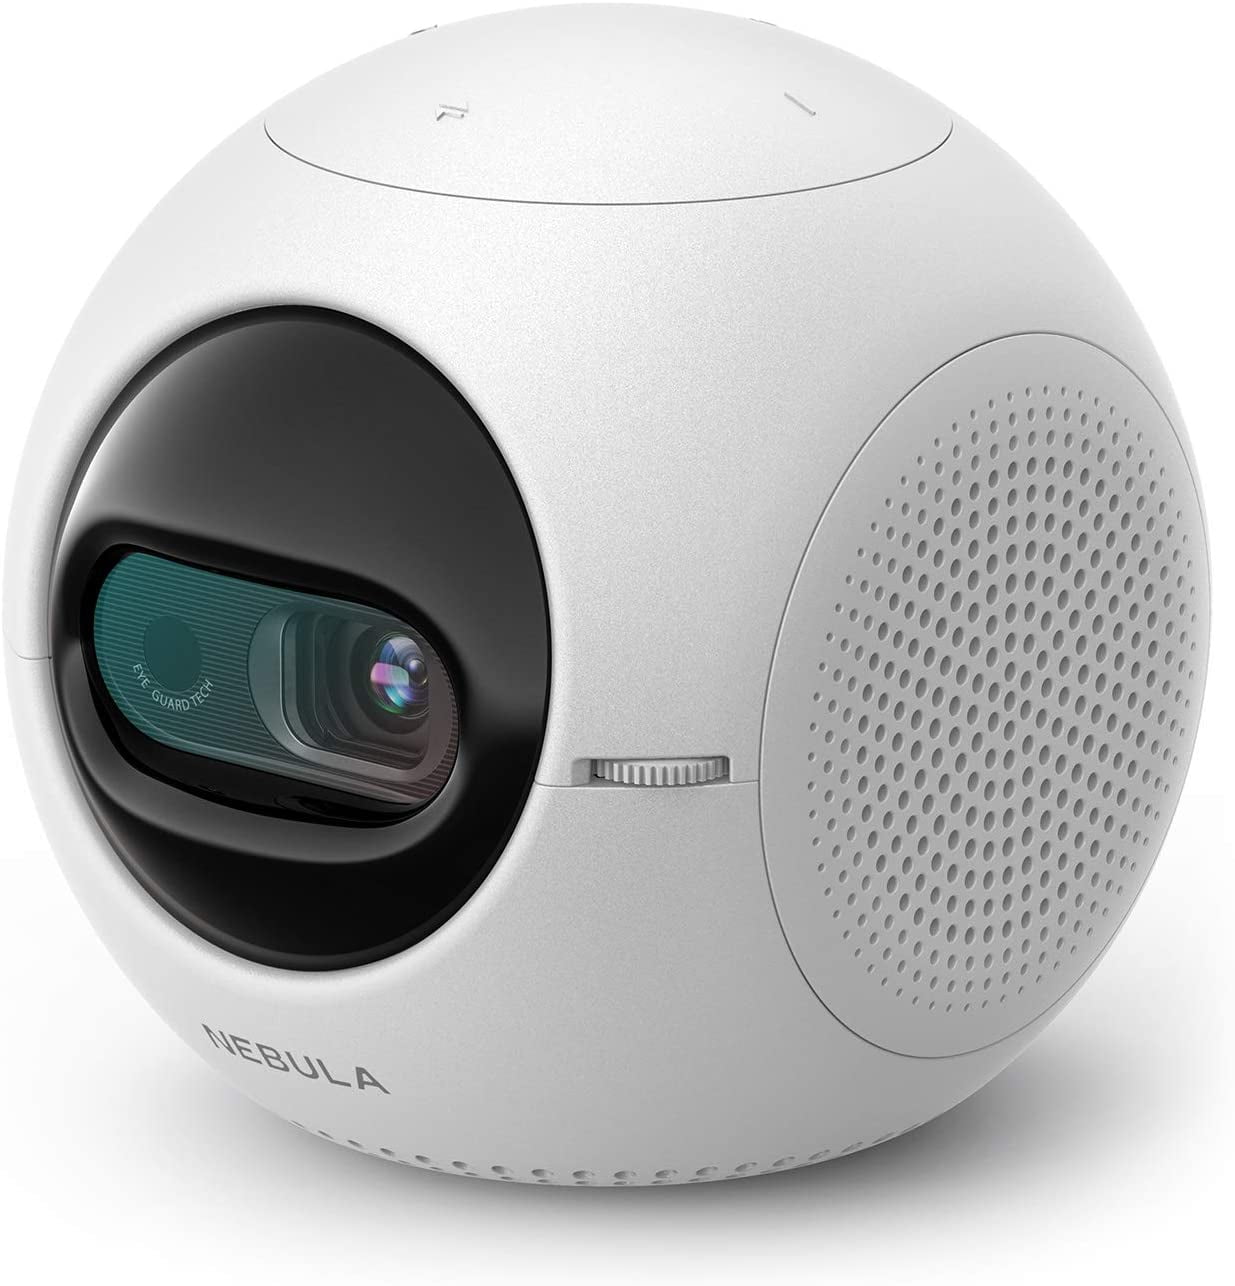 Details about  / Anker Nebula Astro Portable Wi-Fi Projector Parental Controls Kids Home Cinema